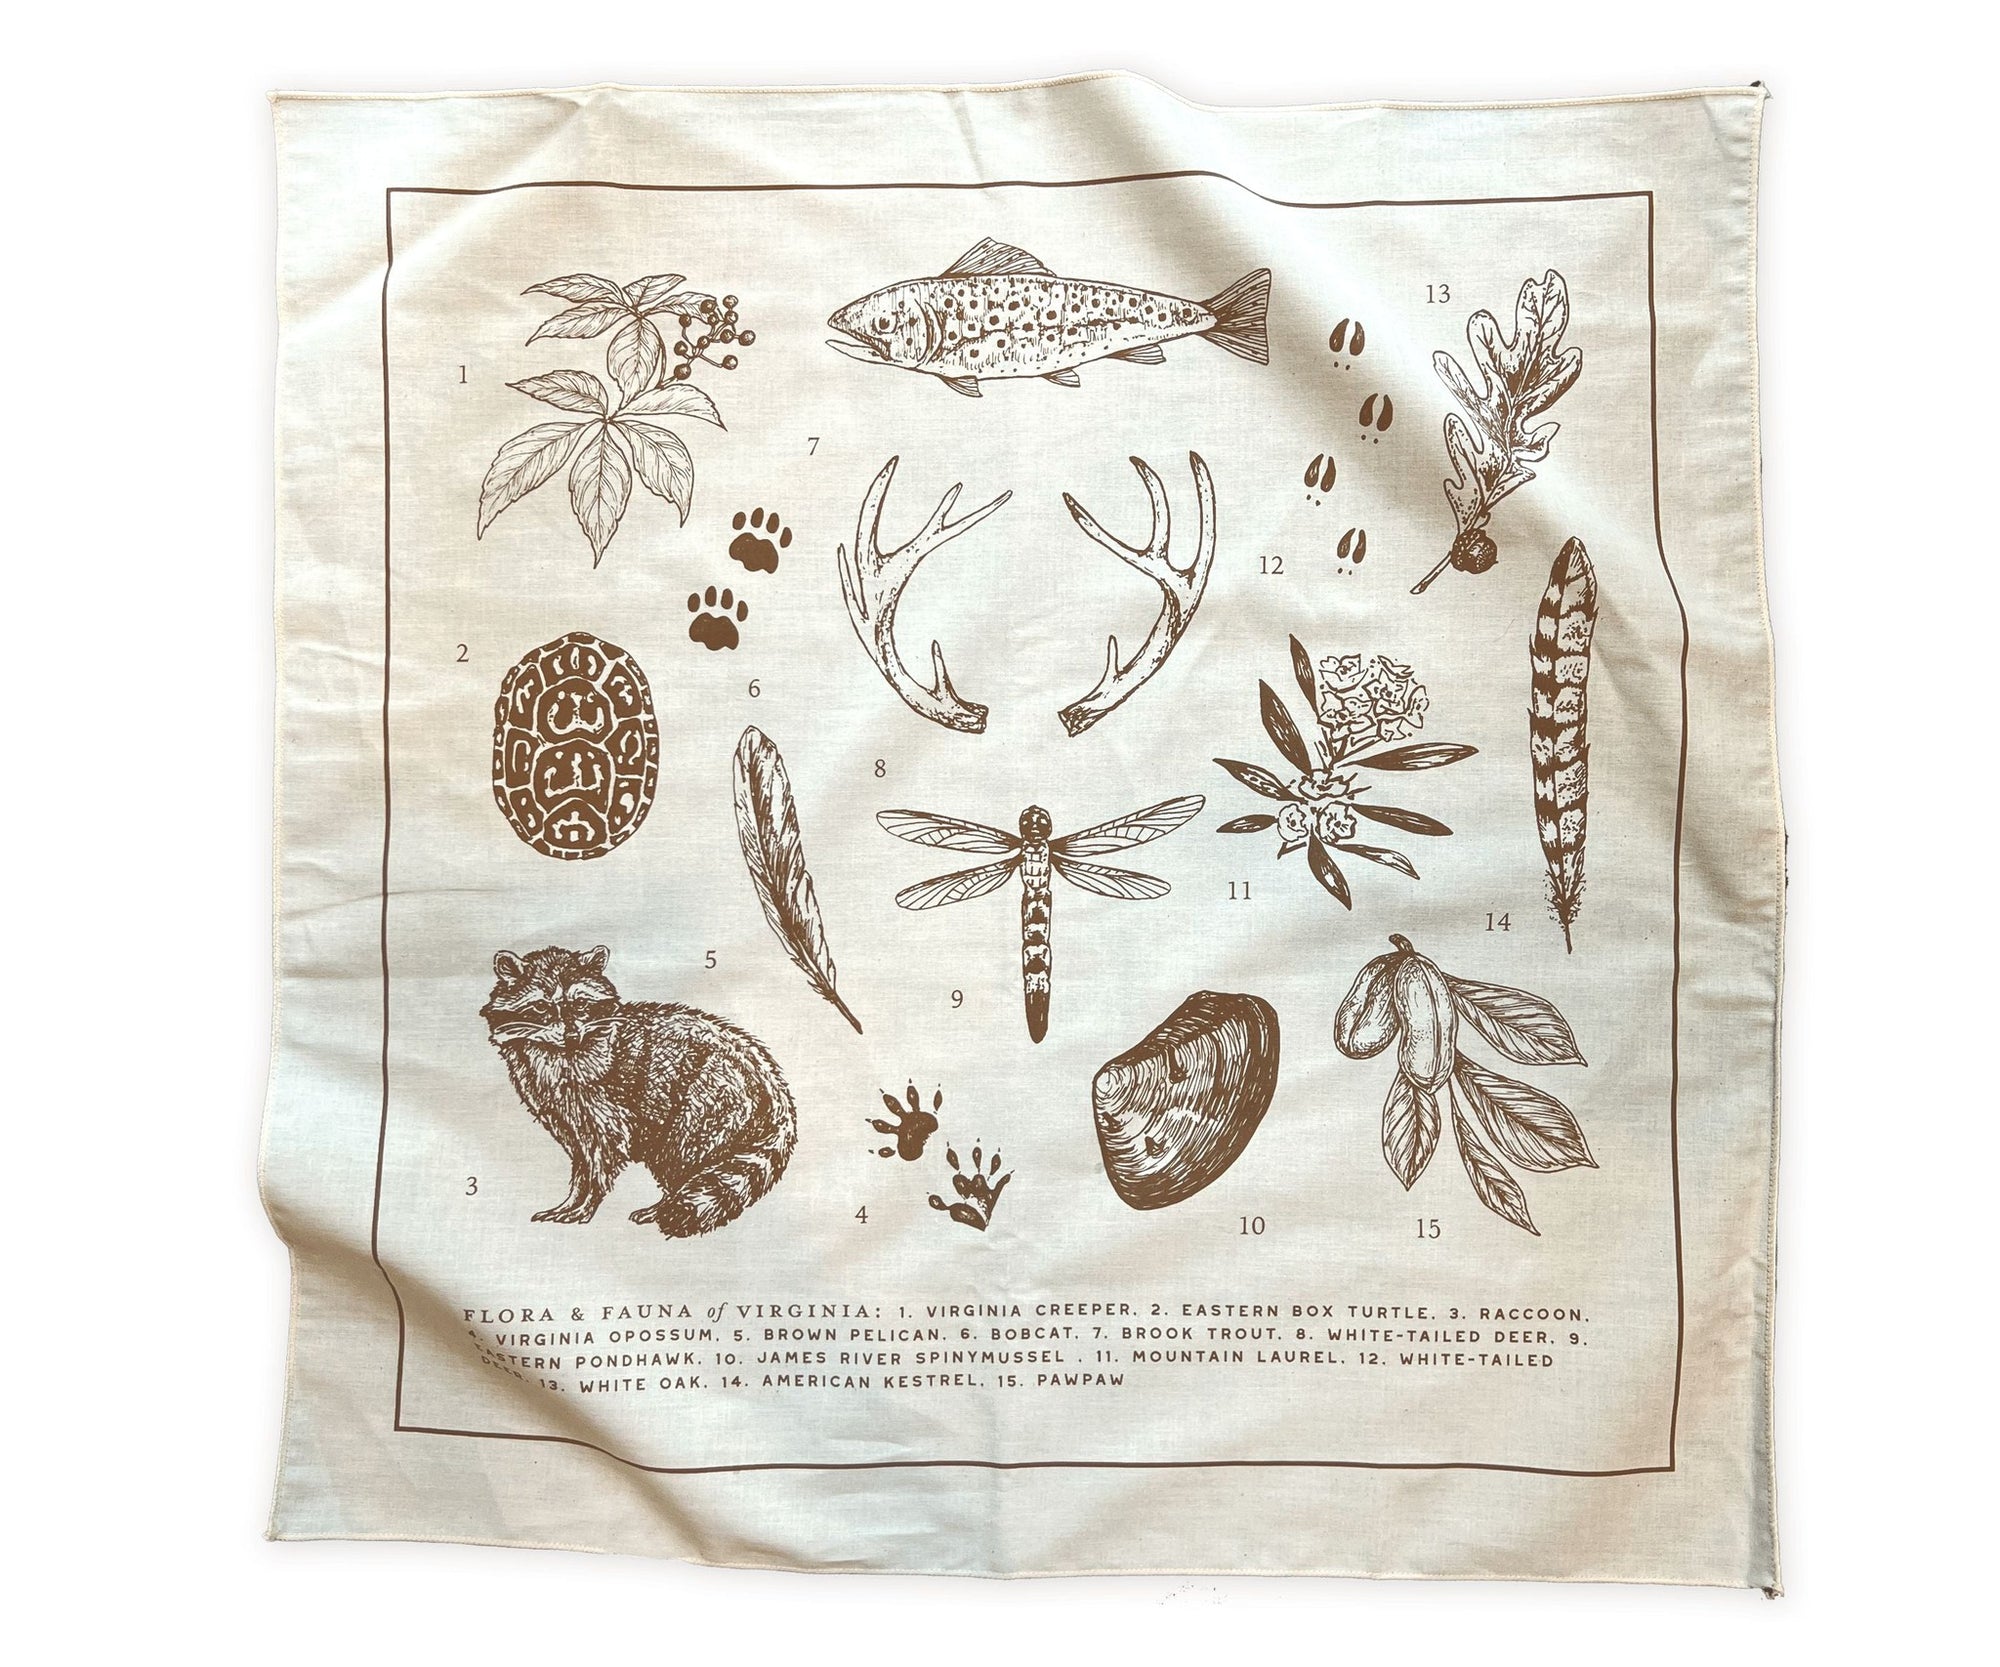 A Virginia Field Guide Bandana with illustrations of animals and plants by The Wild Wander.